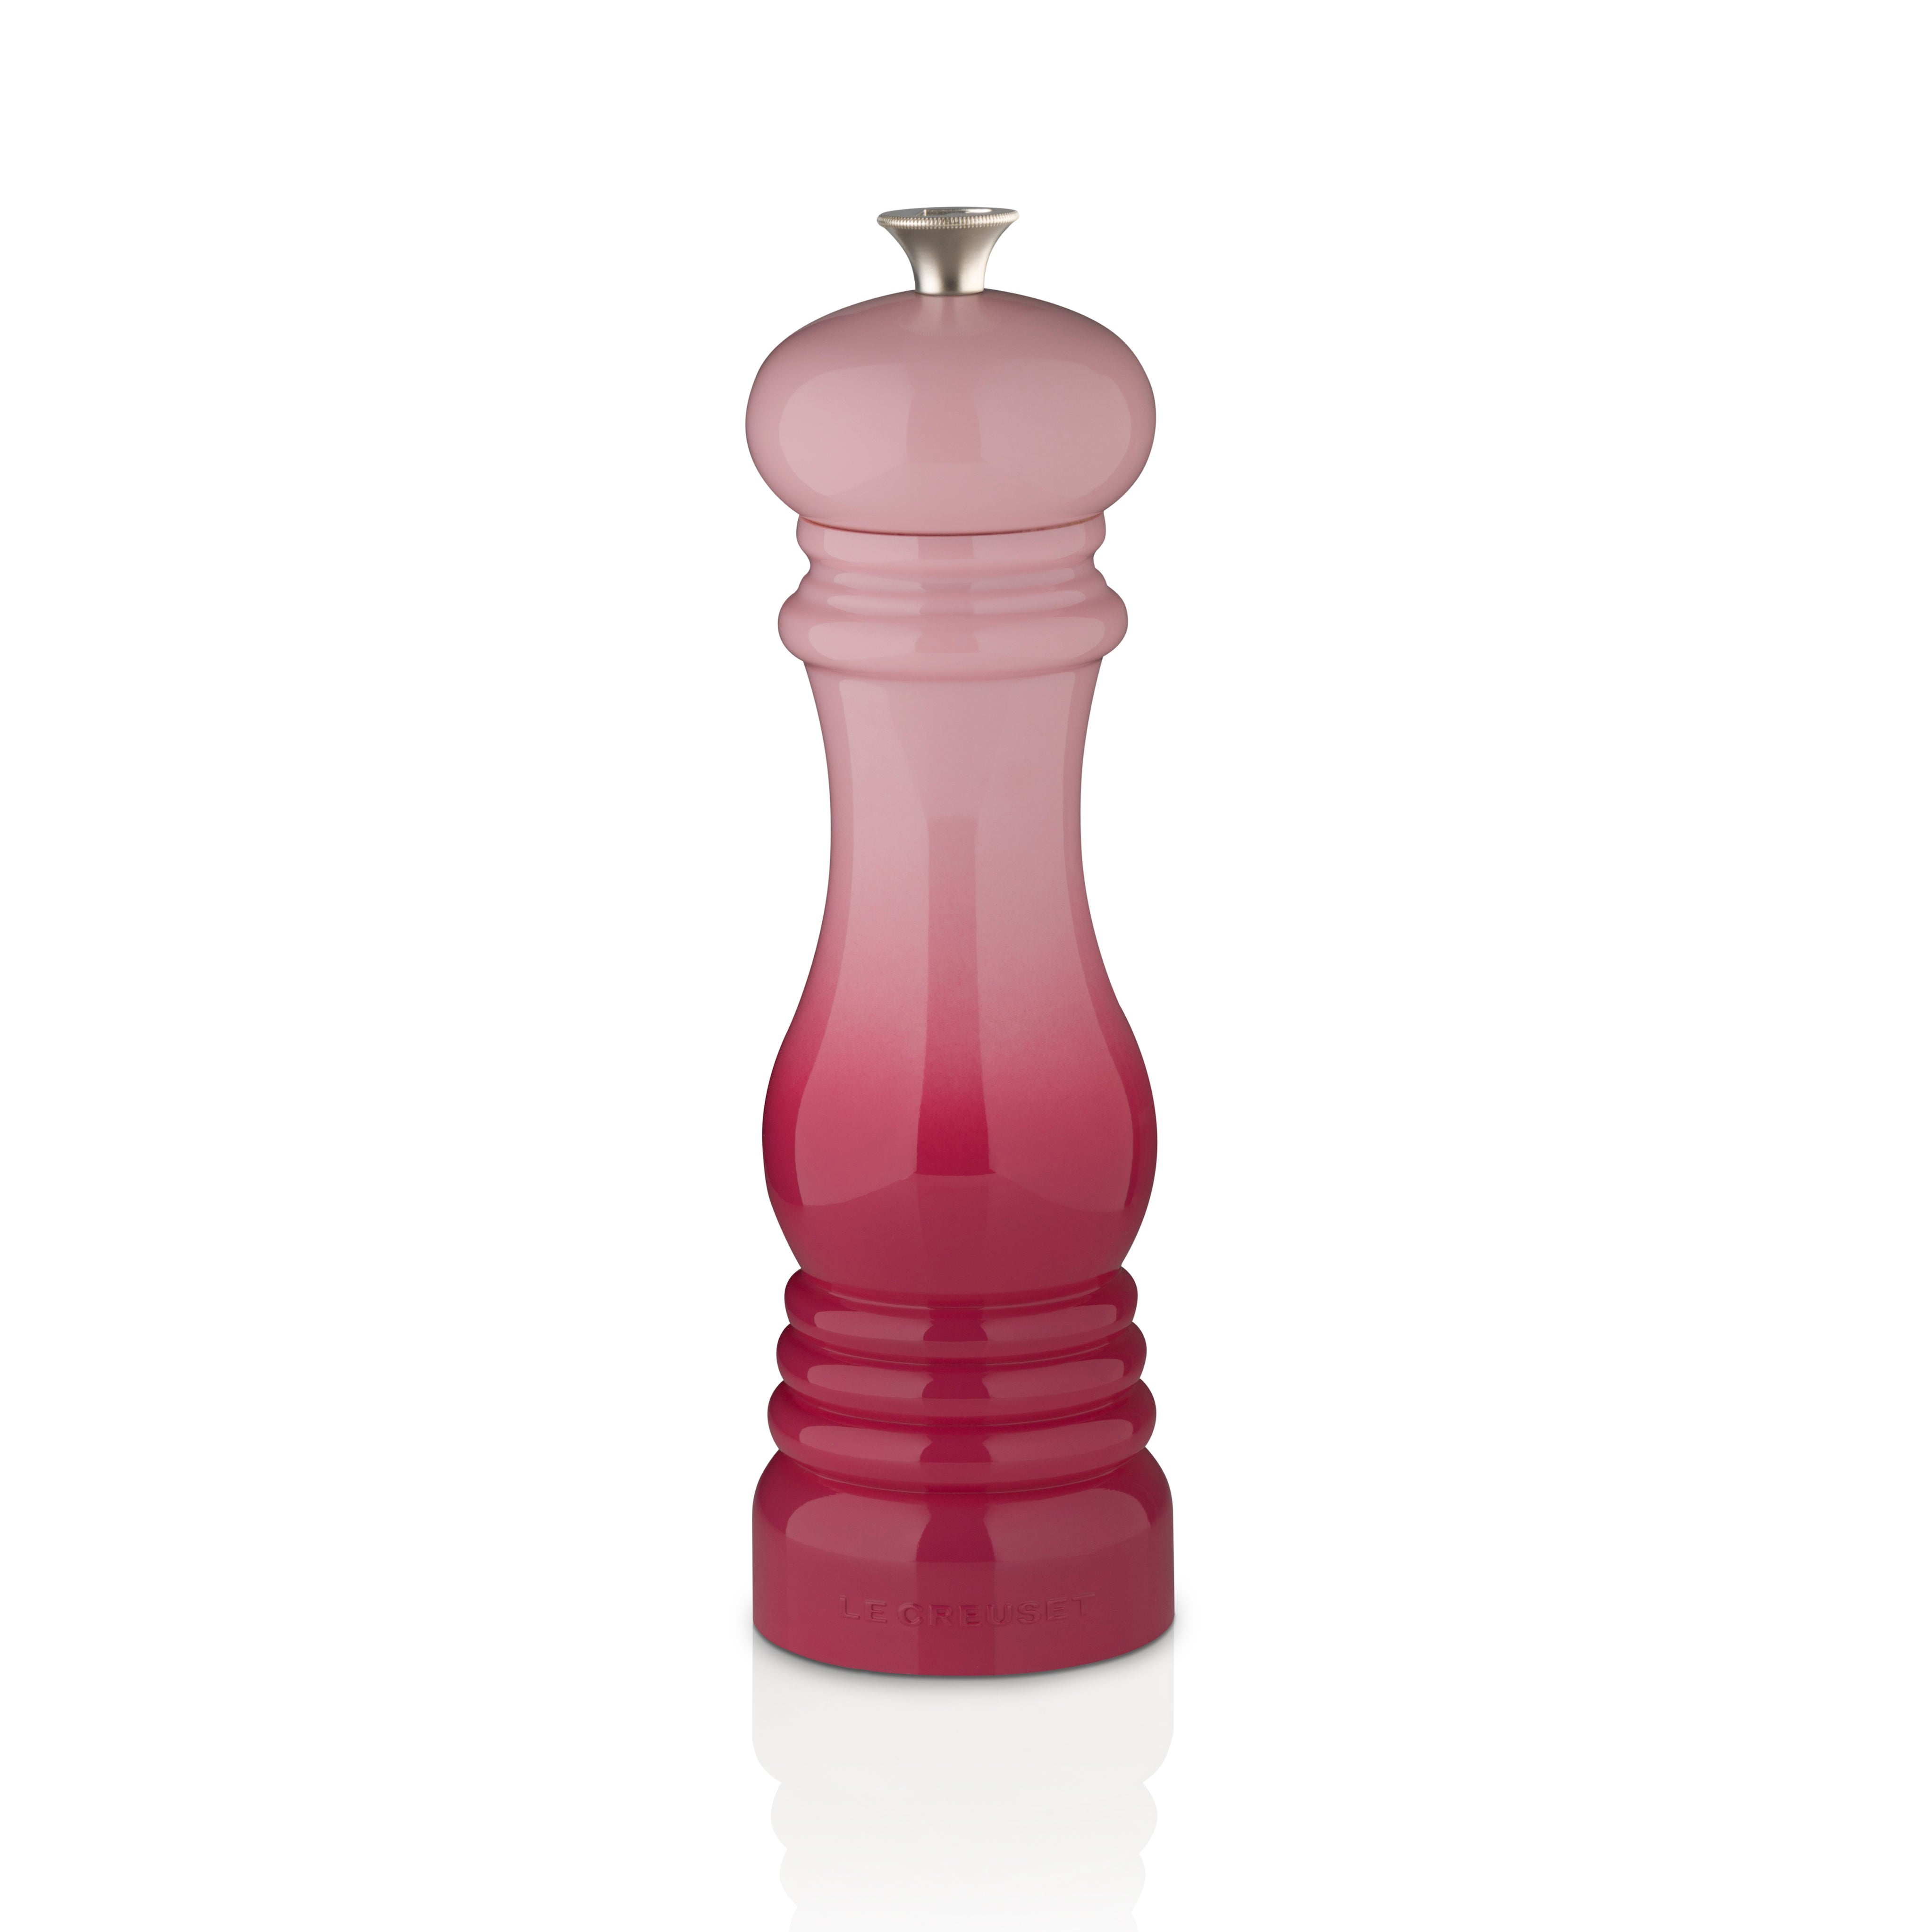 Le Creuset Pepper Mill - Pink